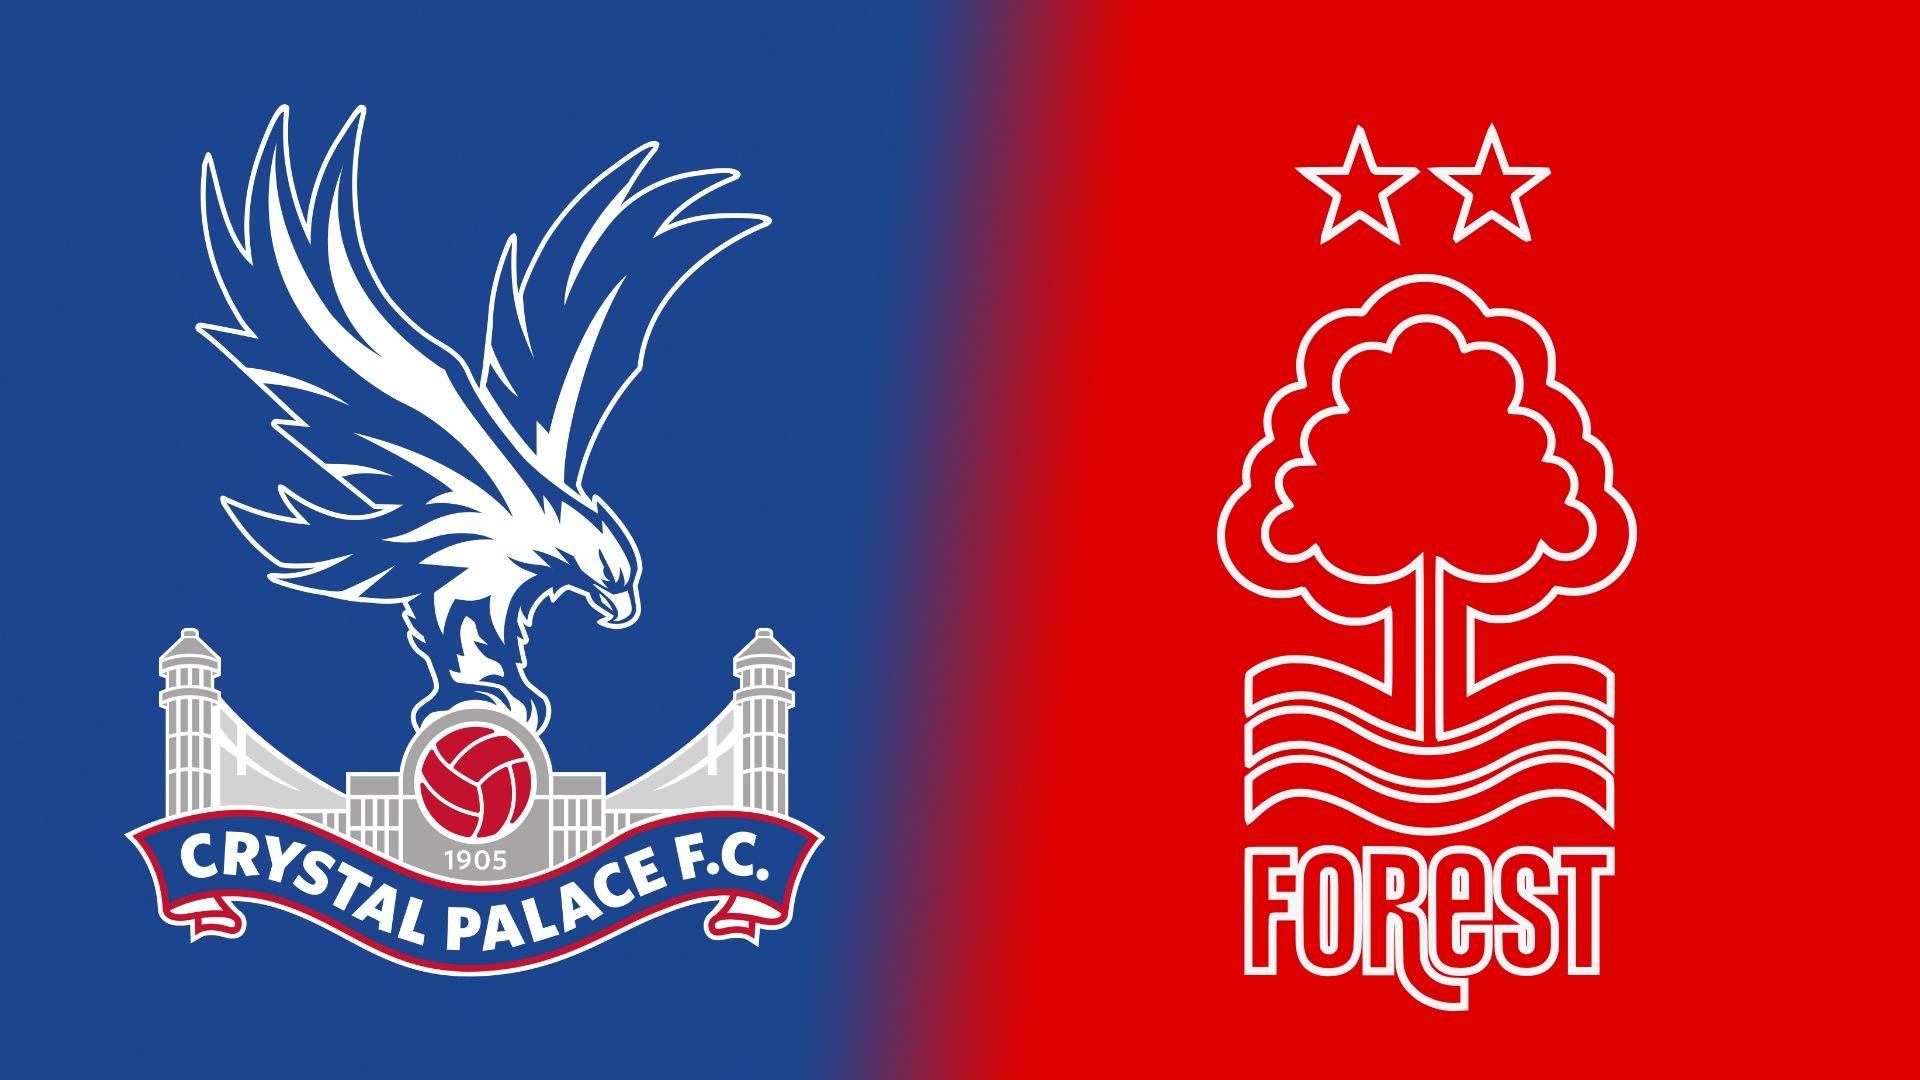 Crystal Palace vs. Nottingham Forest livestream: Here's how to catch the action from anywhere